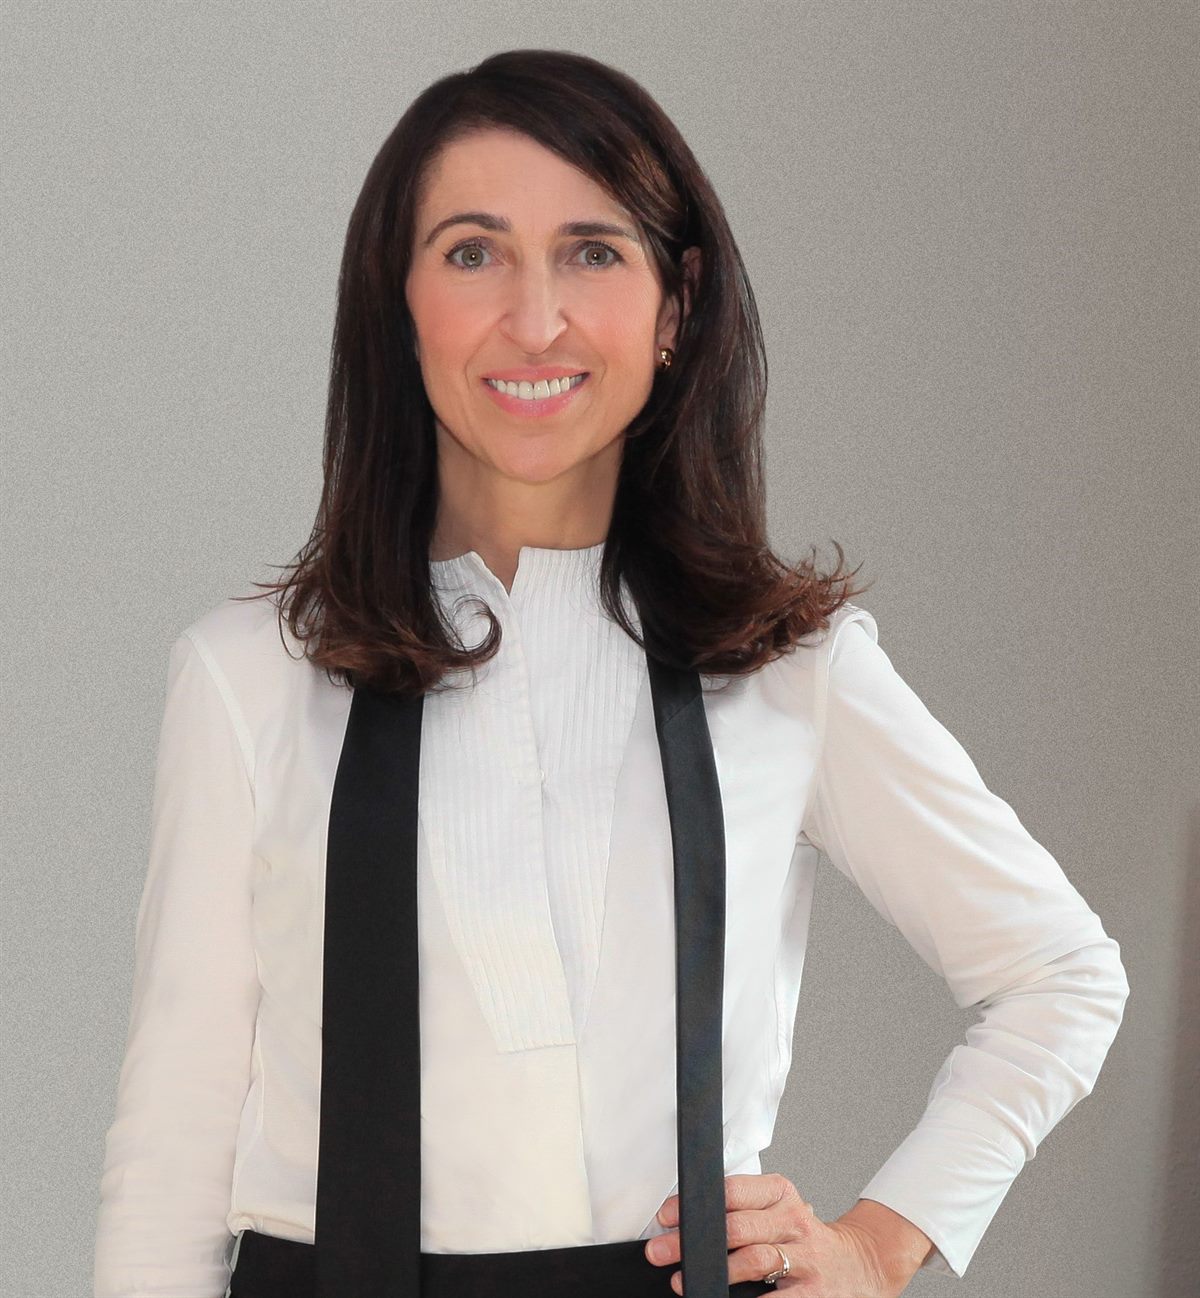 Lucrèce Foufopoulos - De Ridder, Appointed Borealis  Executive Vice President Polyolefins and Innovation & Technology as of 1 January 2019